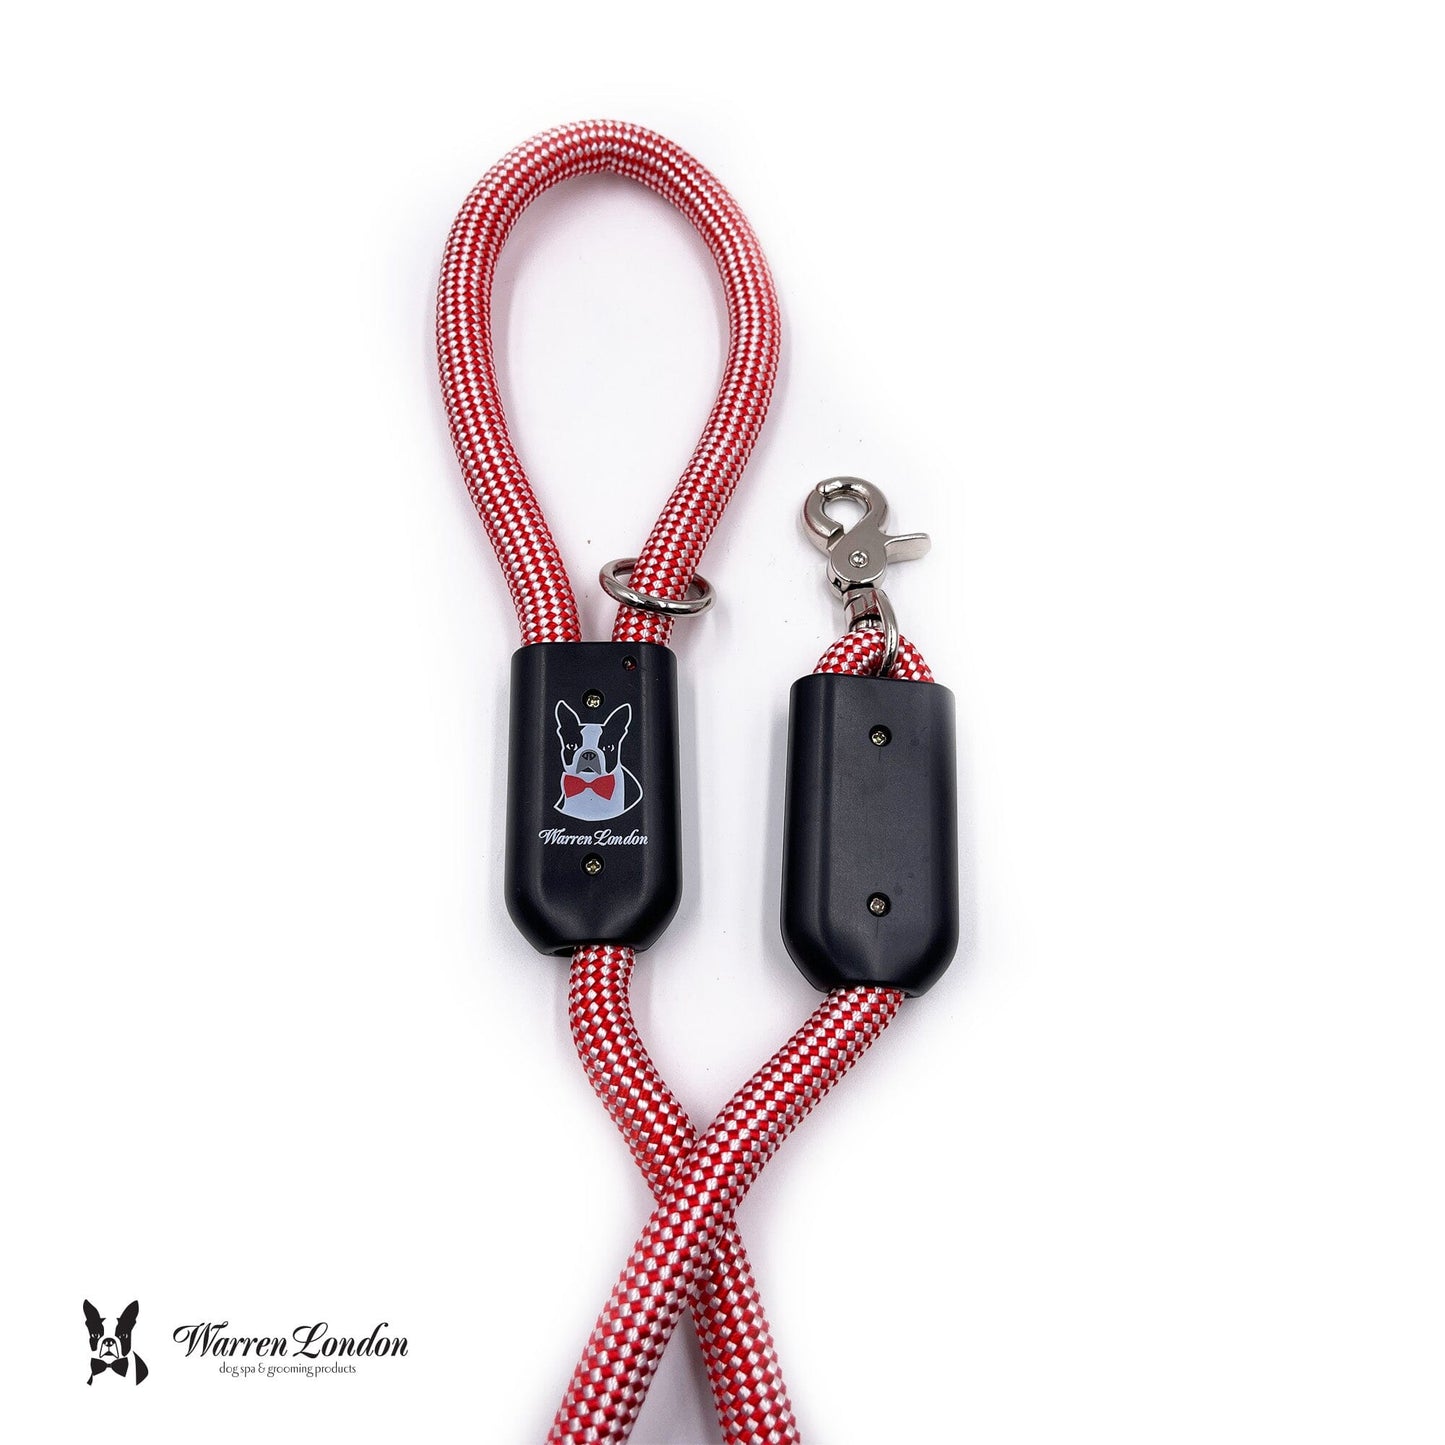 Rope Leash - Red/White Leashes, Collars & Accessories Warren London 